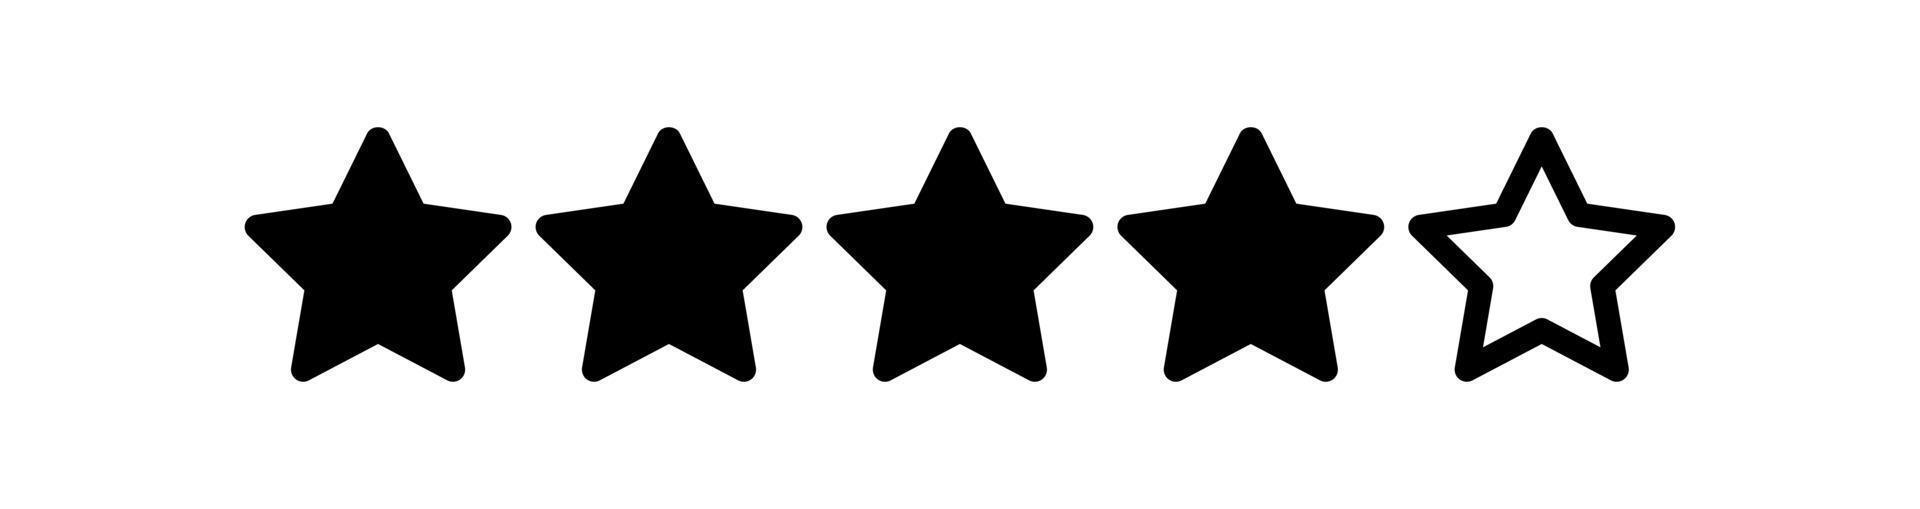 Four Stars Rating Vector illustration for any purposes.